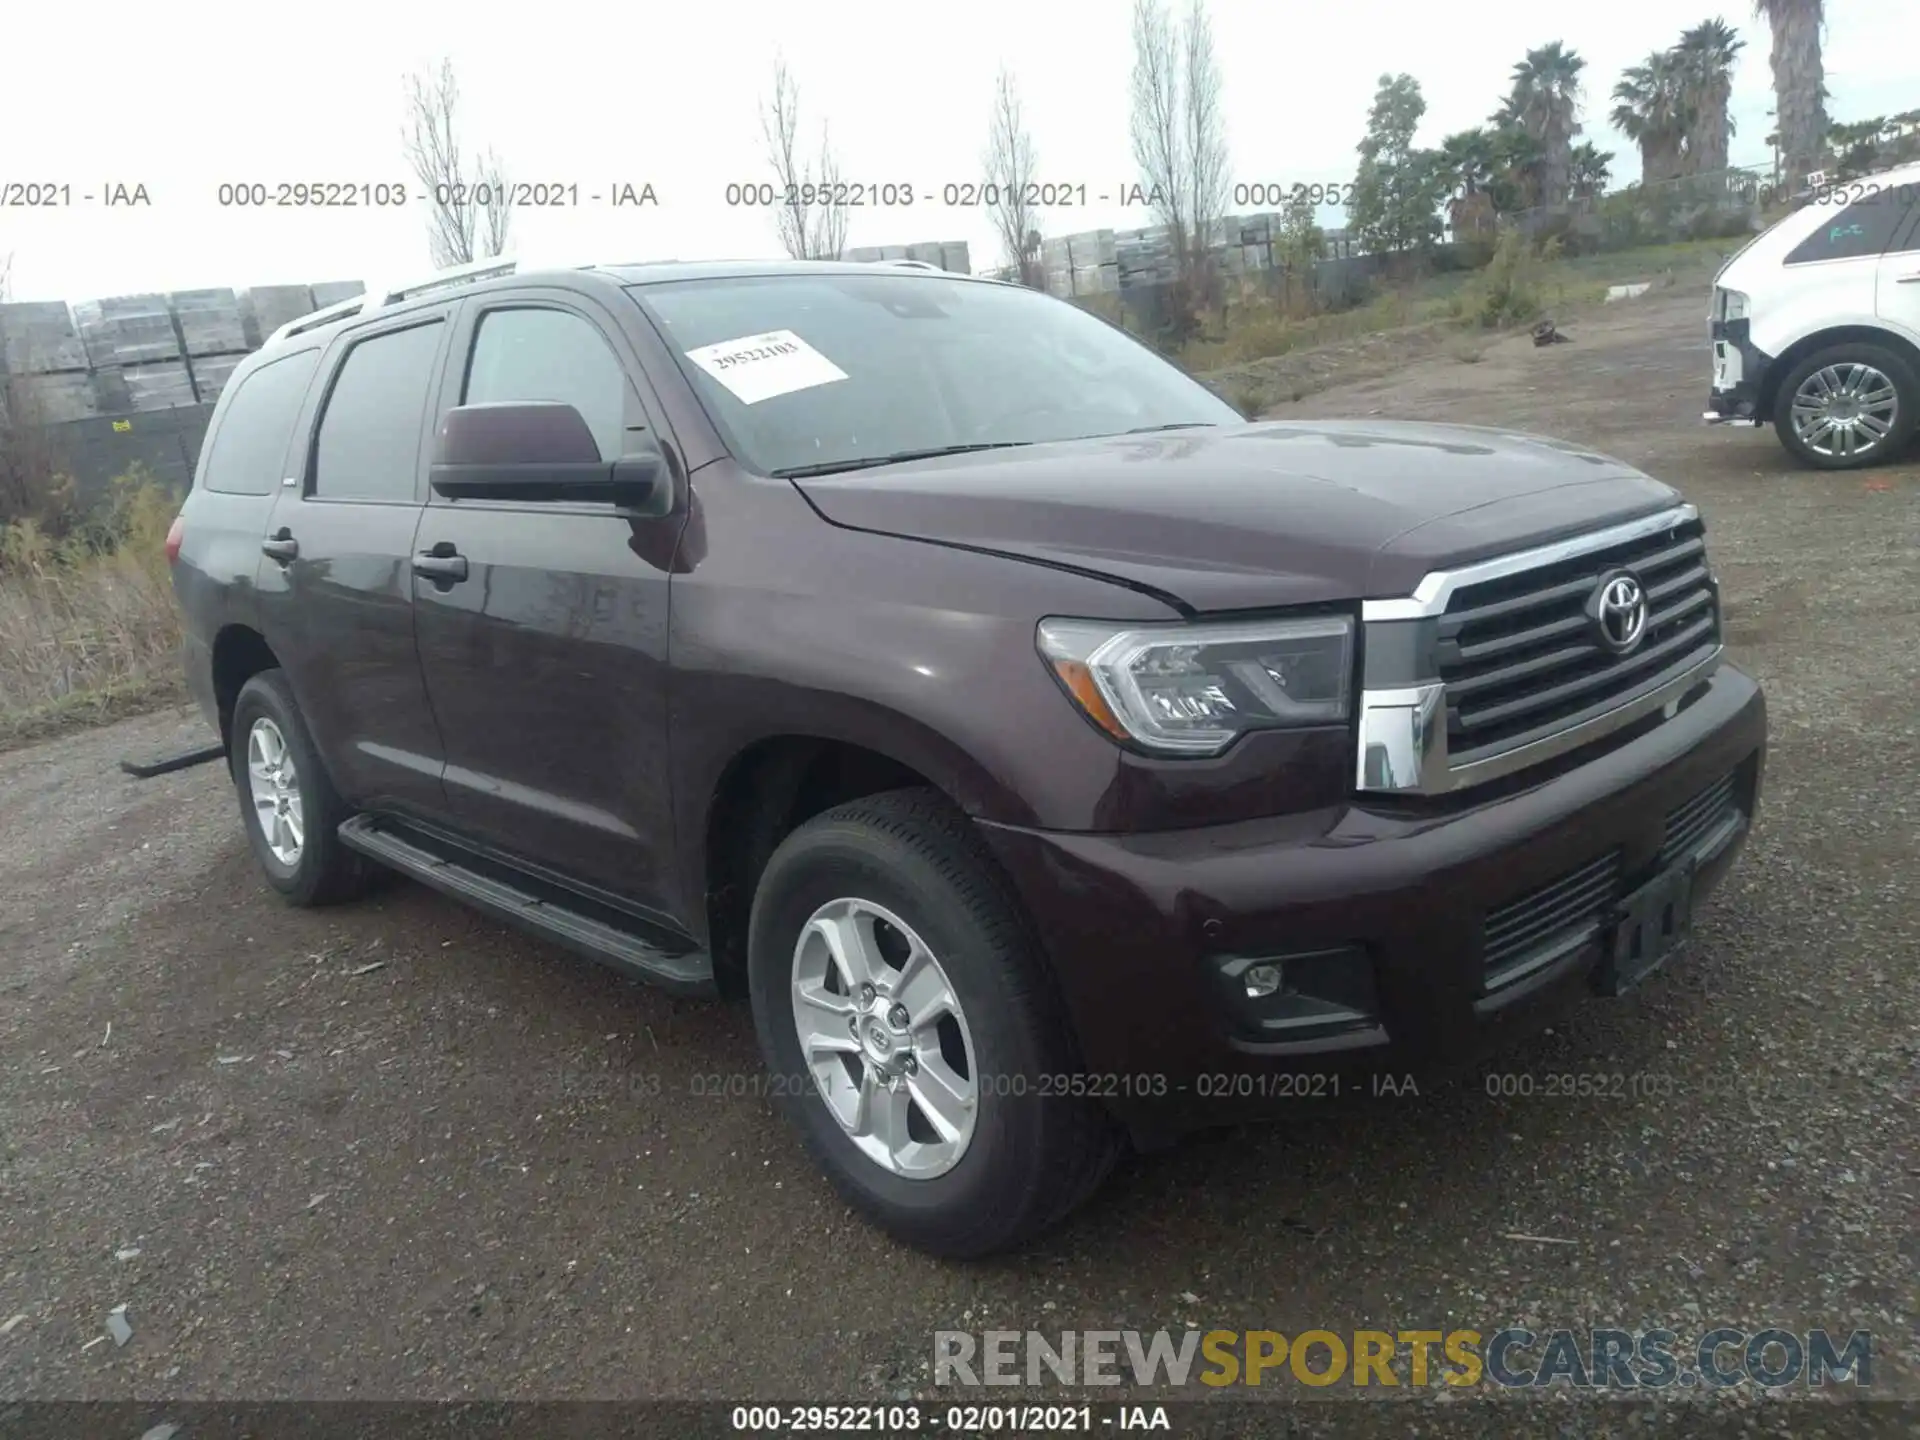 1 Photograph of a damaged car 5TDBY5G16KS173468 TOYOTA SEQUOIA 2019